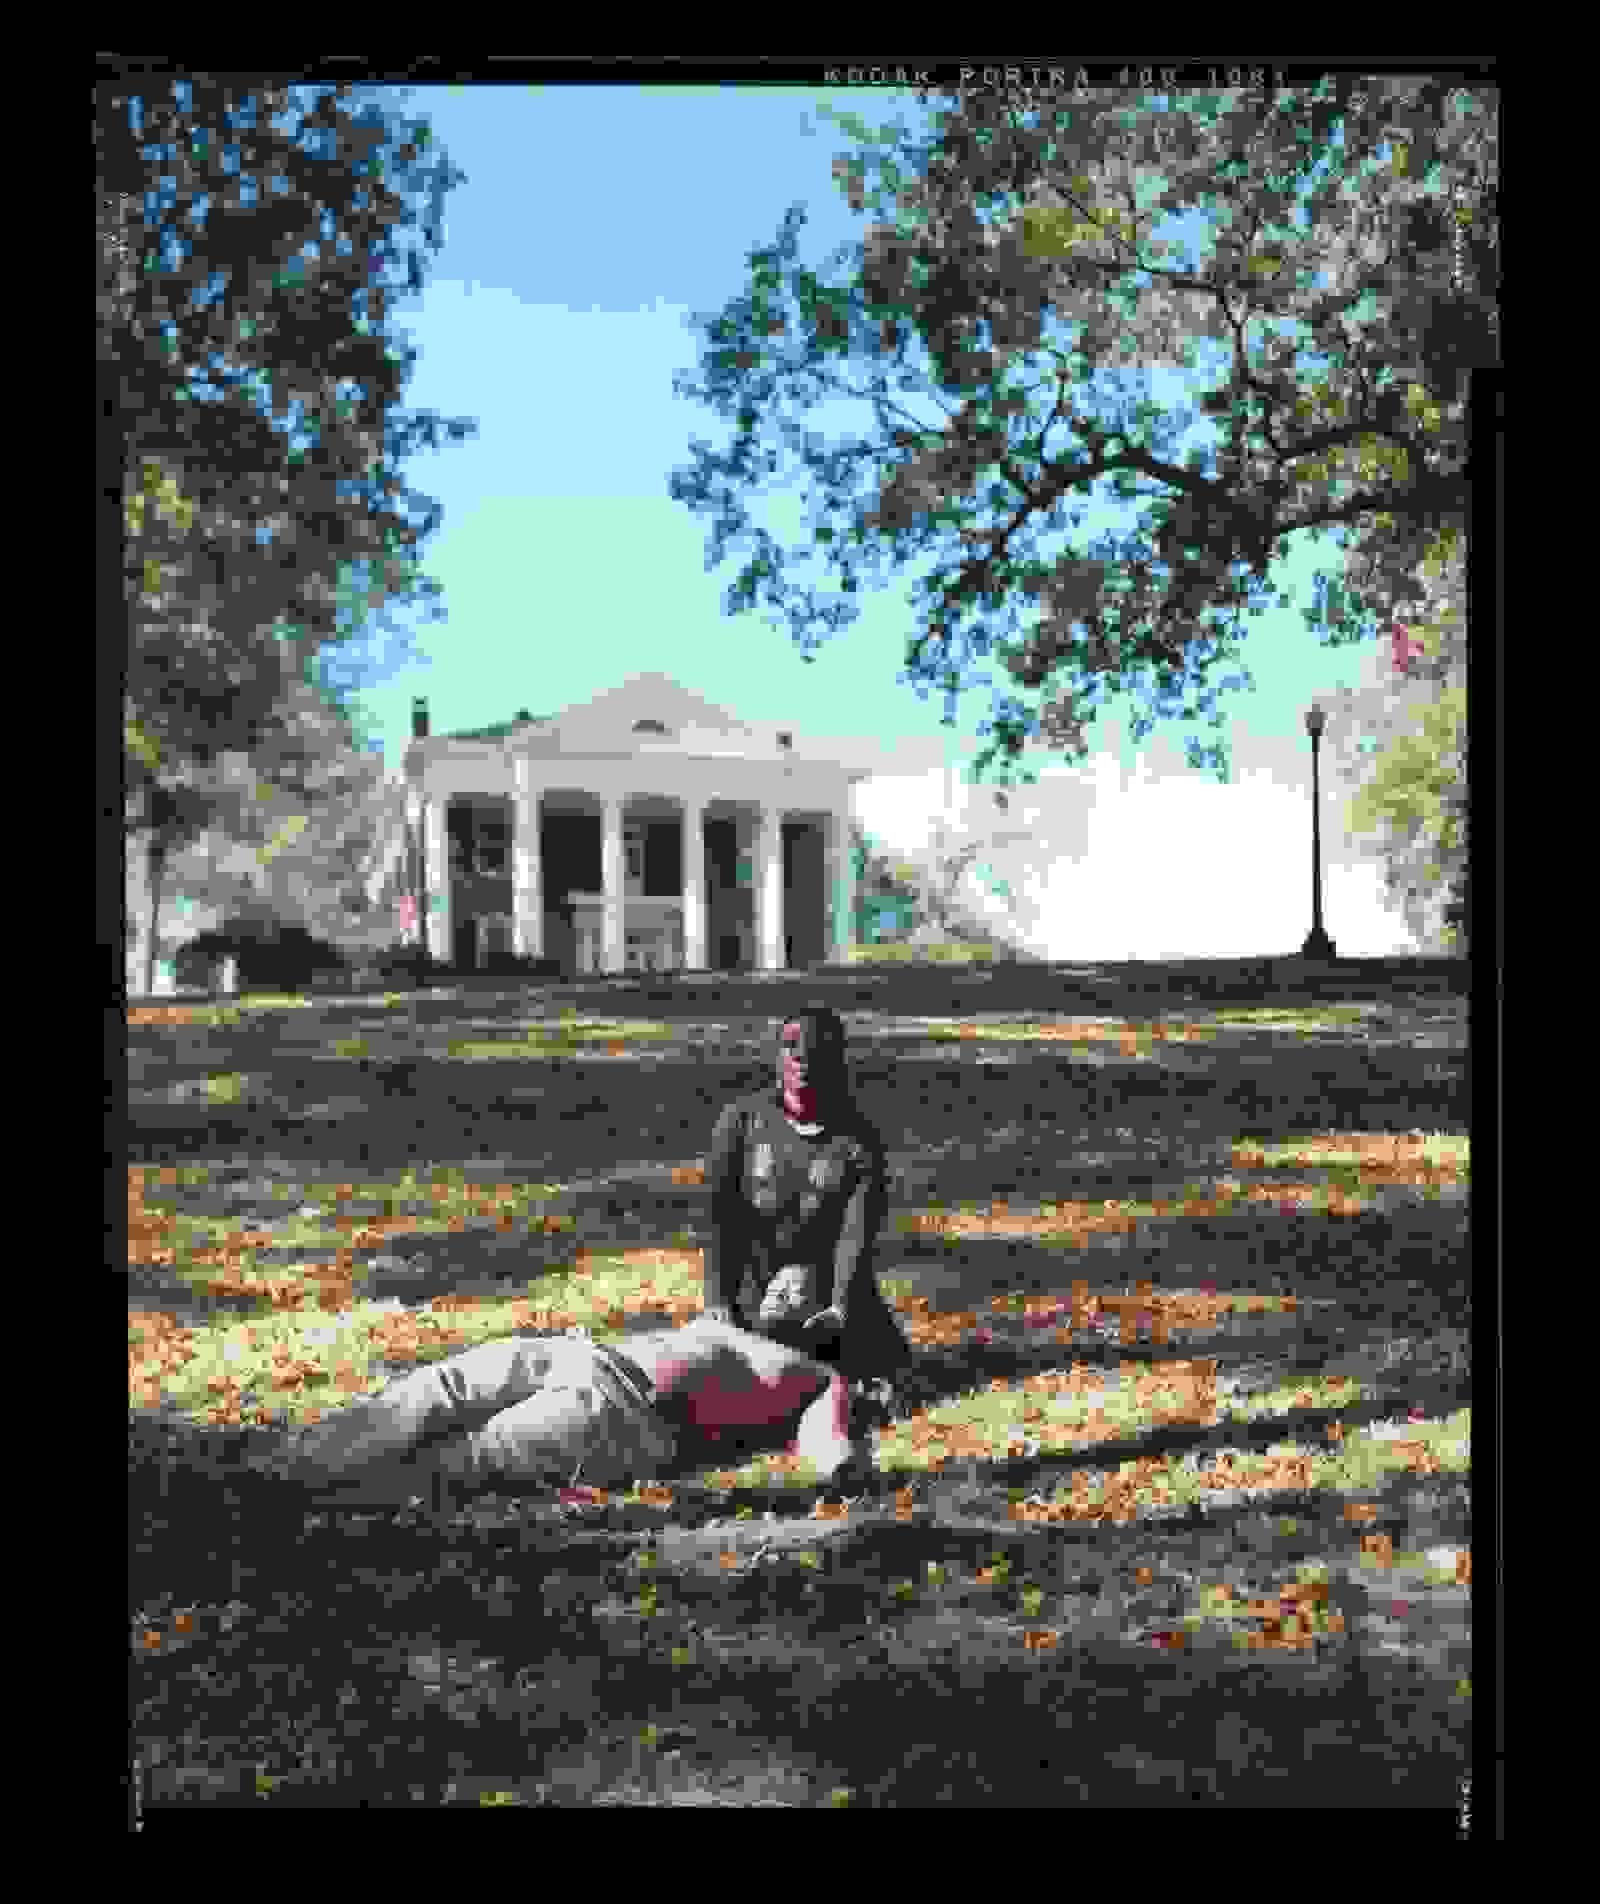 A color photograph of a black woman sitting in the grass cradling the head of a shirtless black man on her lap, as he lies flat in the grass. In the background is a brick building with white columns, trees, blue skies, and a streetlamp.